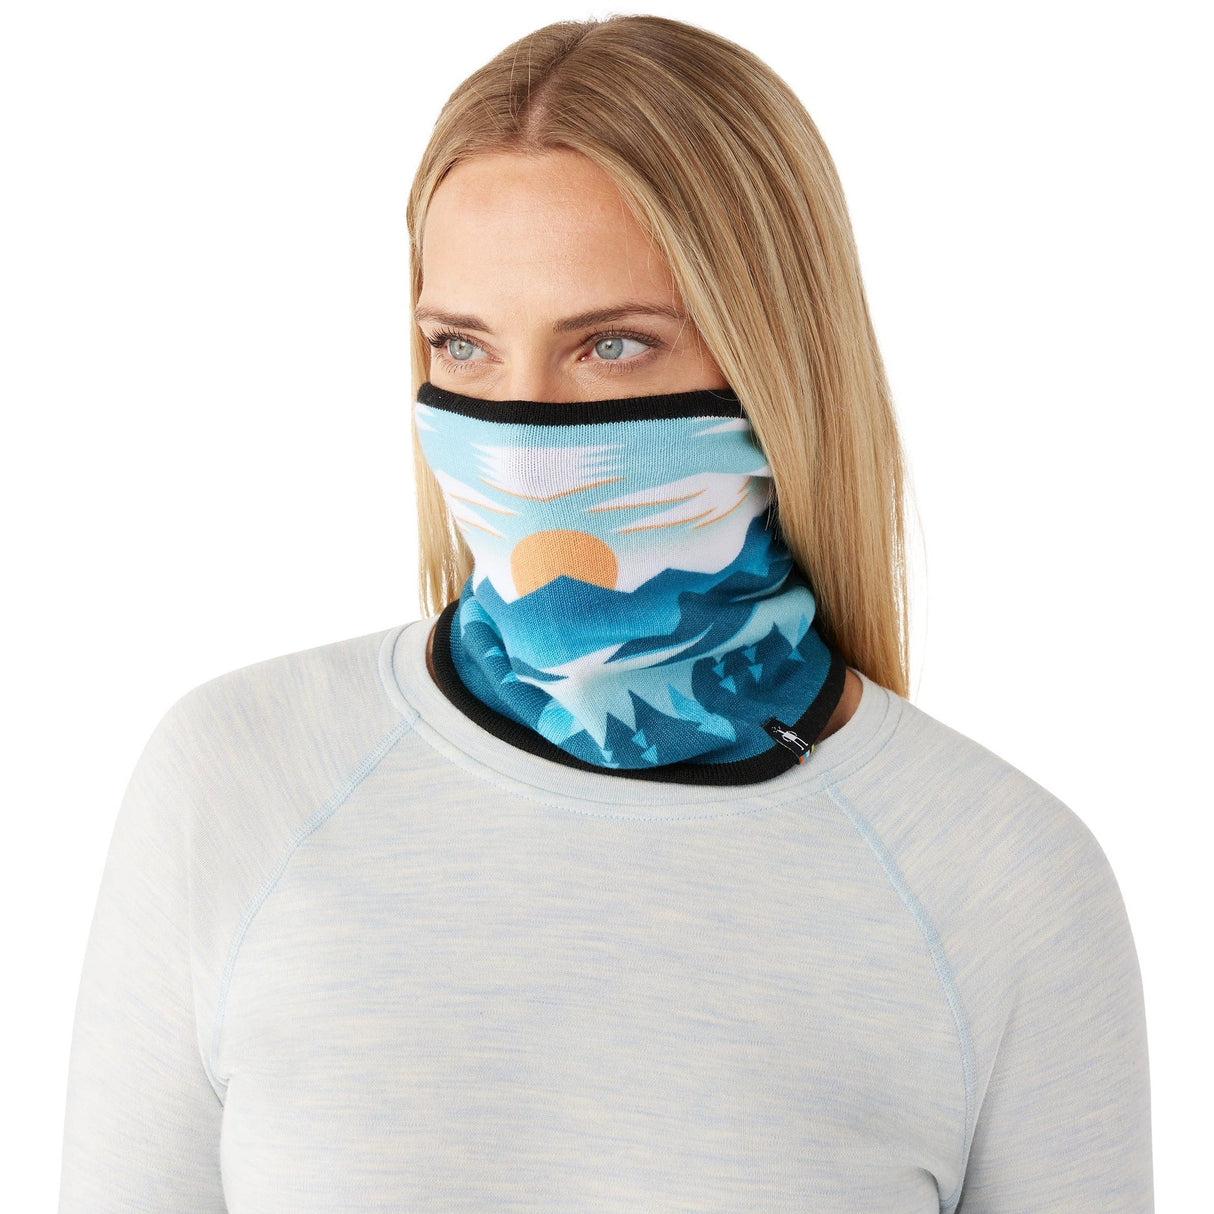 Smartwool Chasing Mountains Print Neck Gaiter  -  One Size Fits Most / Multi Color